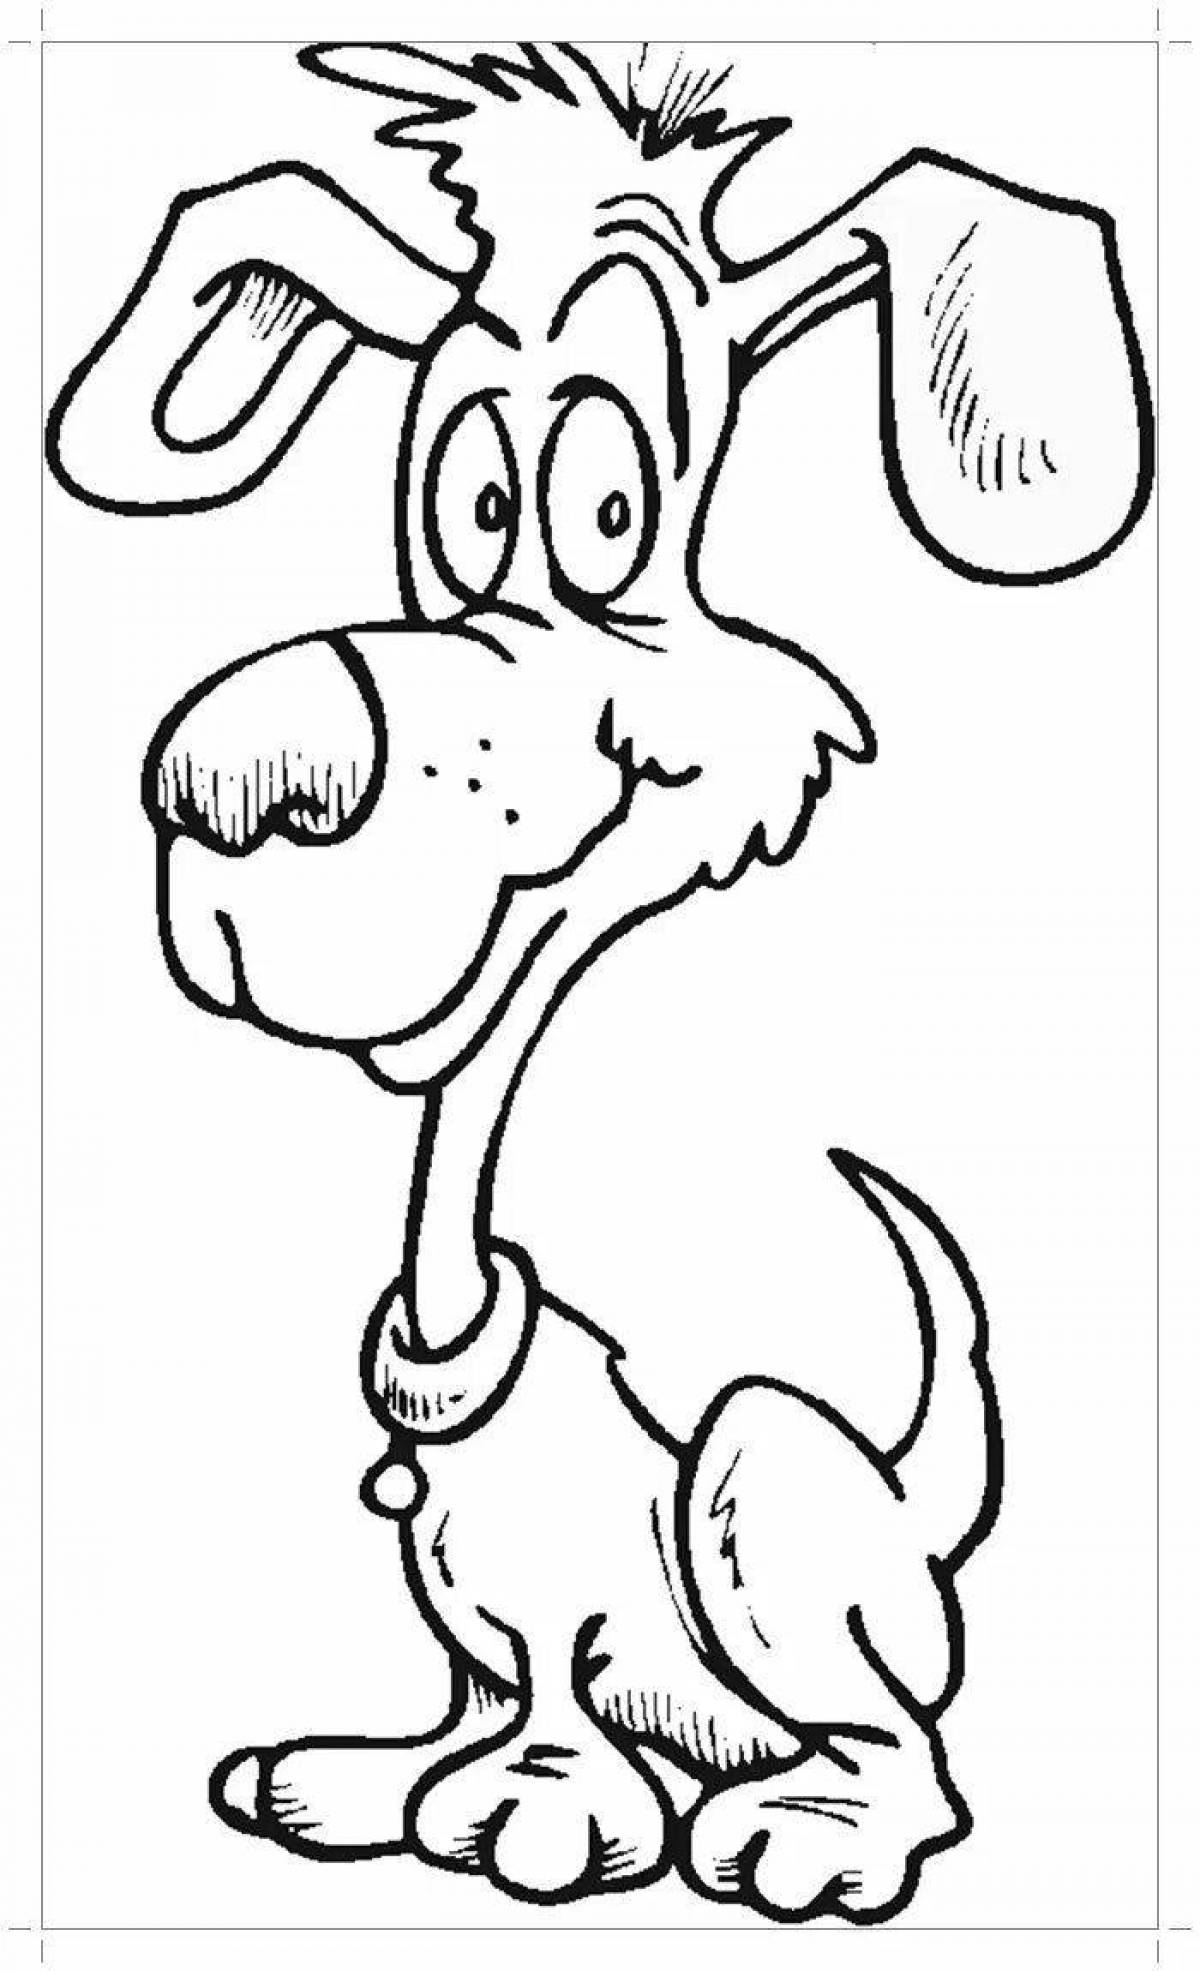 Waggish coloring page funny animals